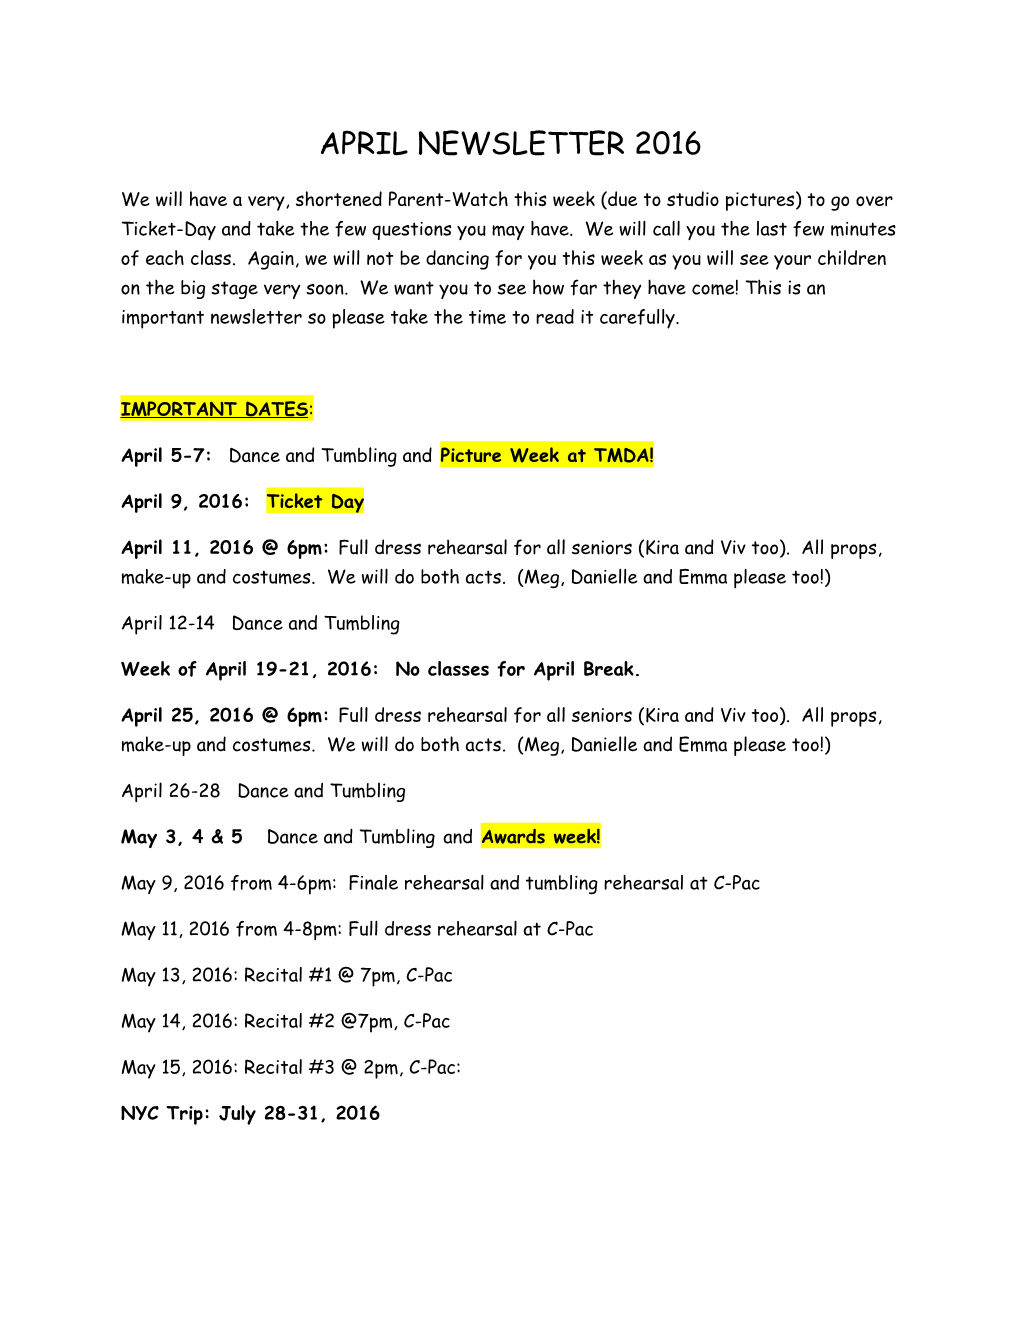 April 5-7: Dance and Tumbling Andpicture Week at TMDA!